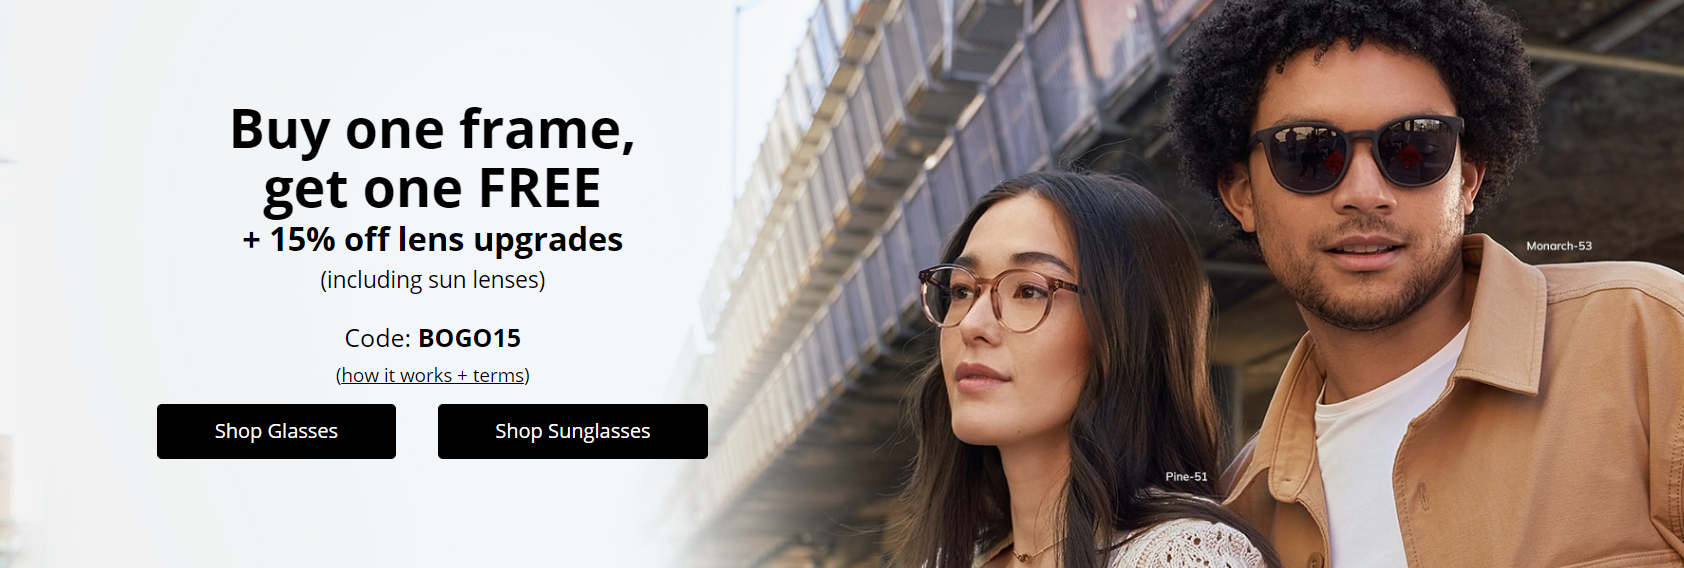 Buy One Frame, Get One Free Plus 15% Off Lenses with this Clearly promo code